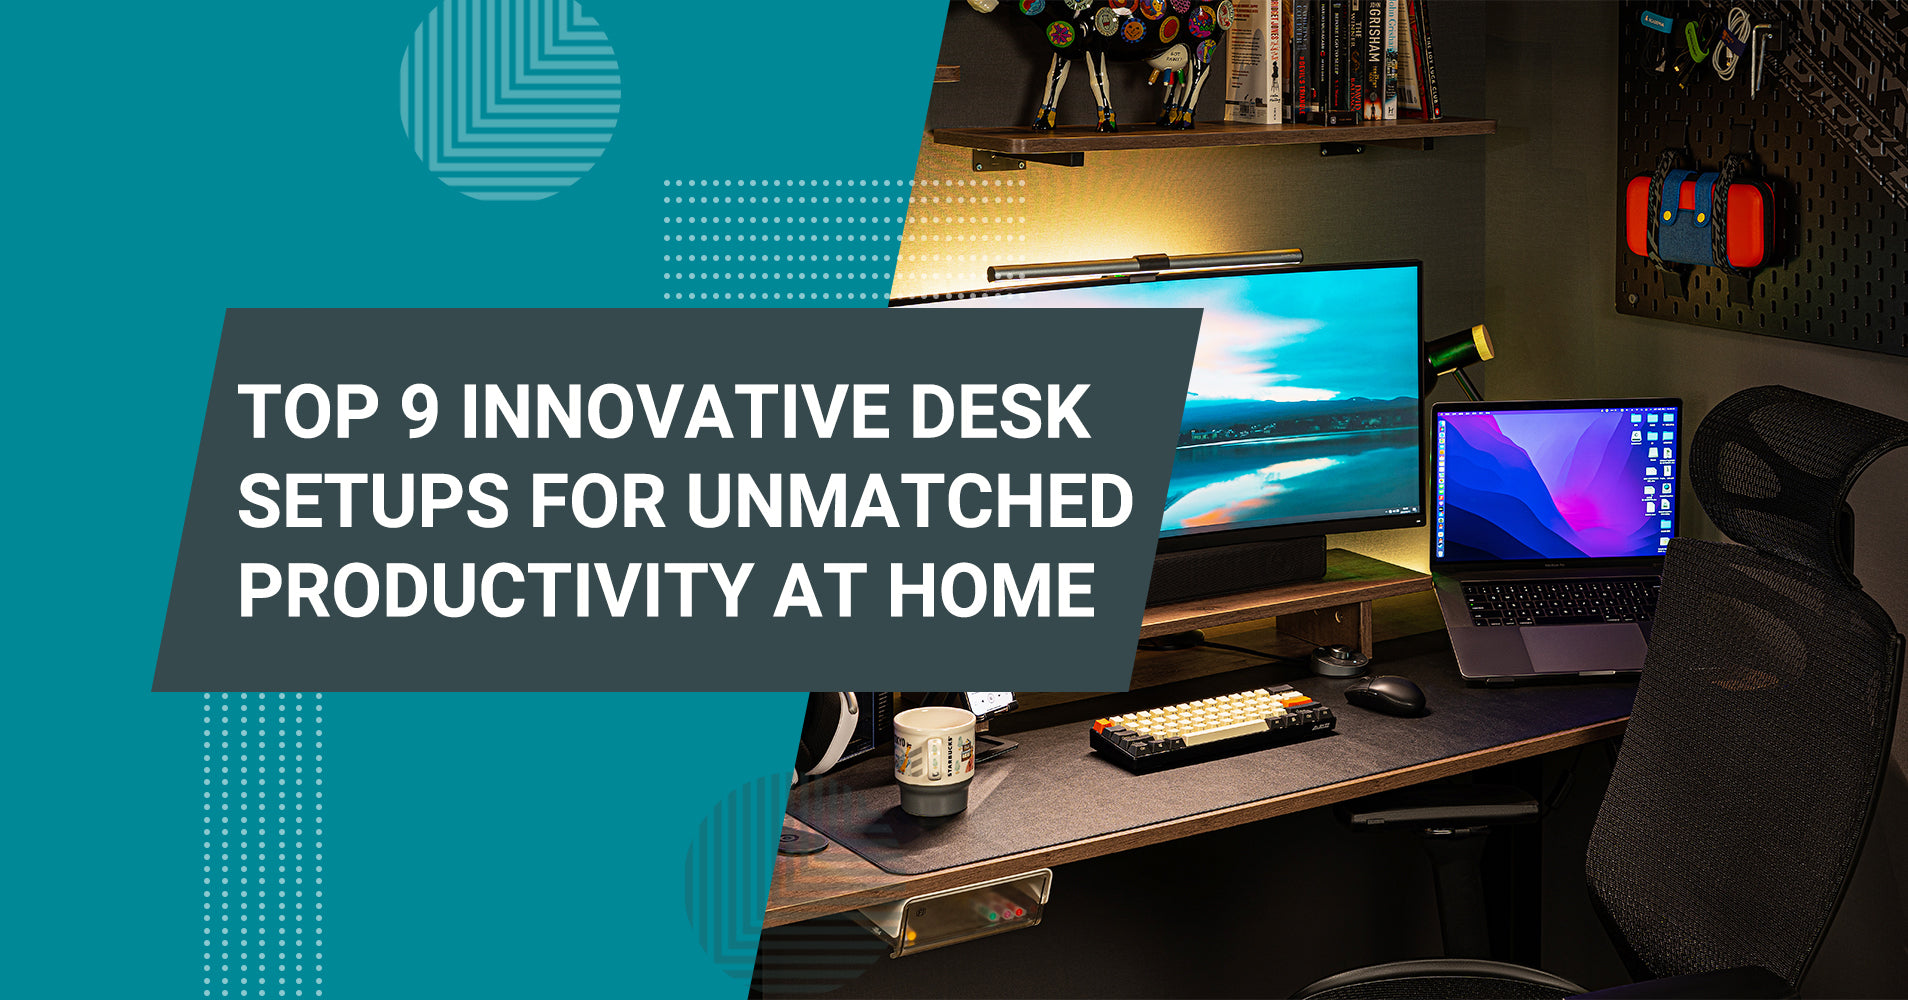 Transform Your Workspace: Top 9 Innovative Desk Setups for Unmatched Productivity at Home